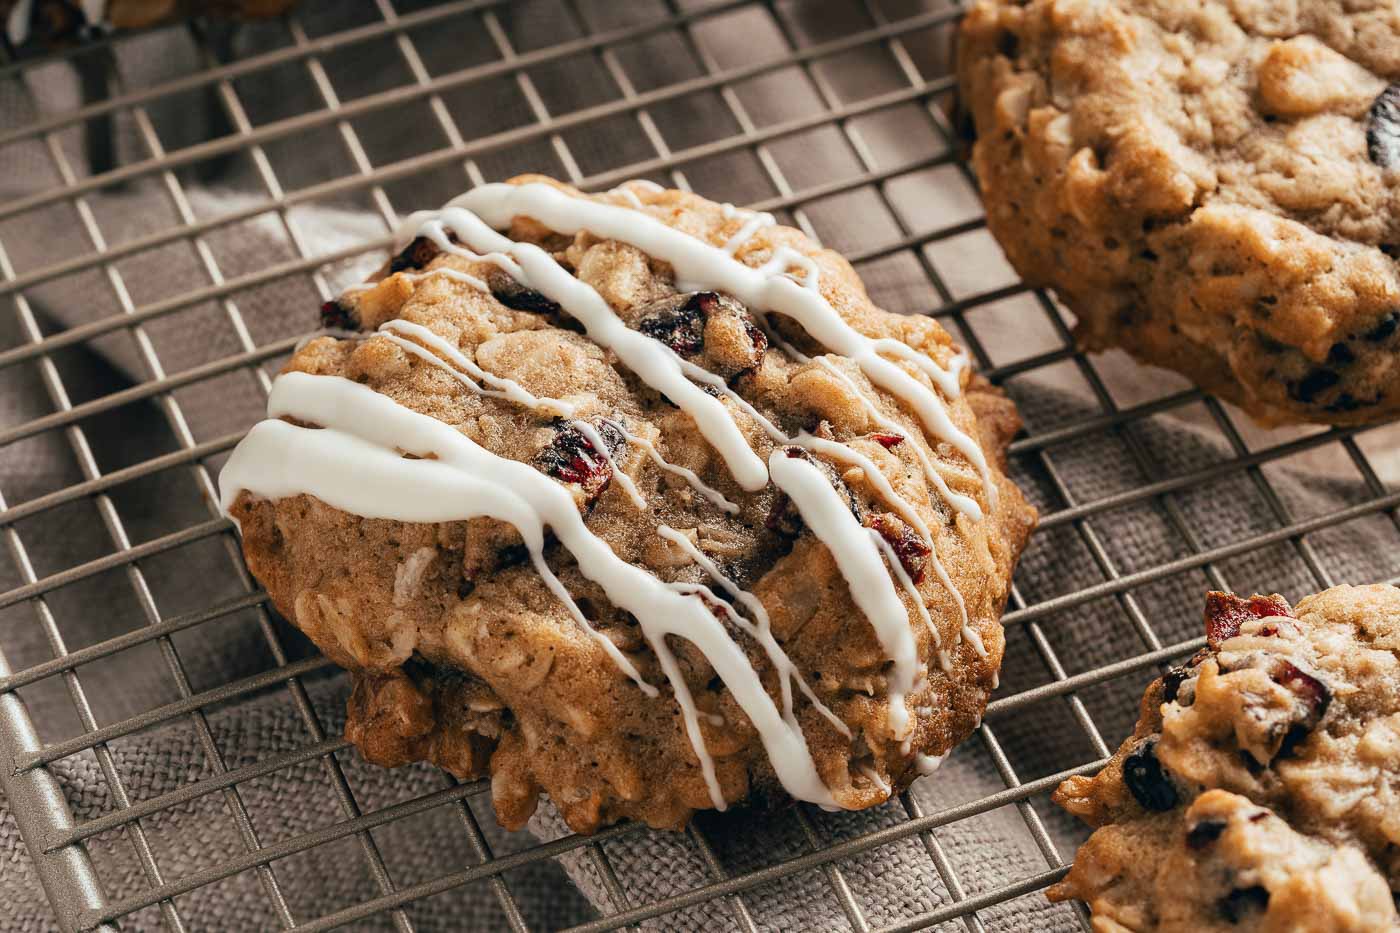 cranberry oatmeal cookies